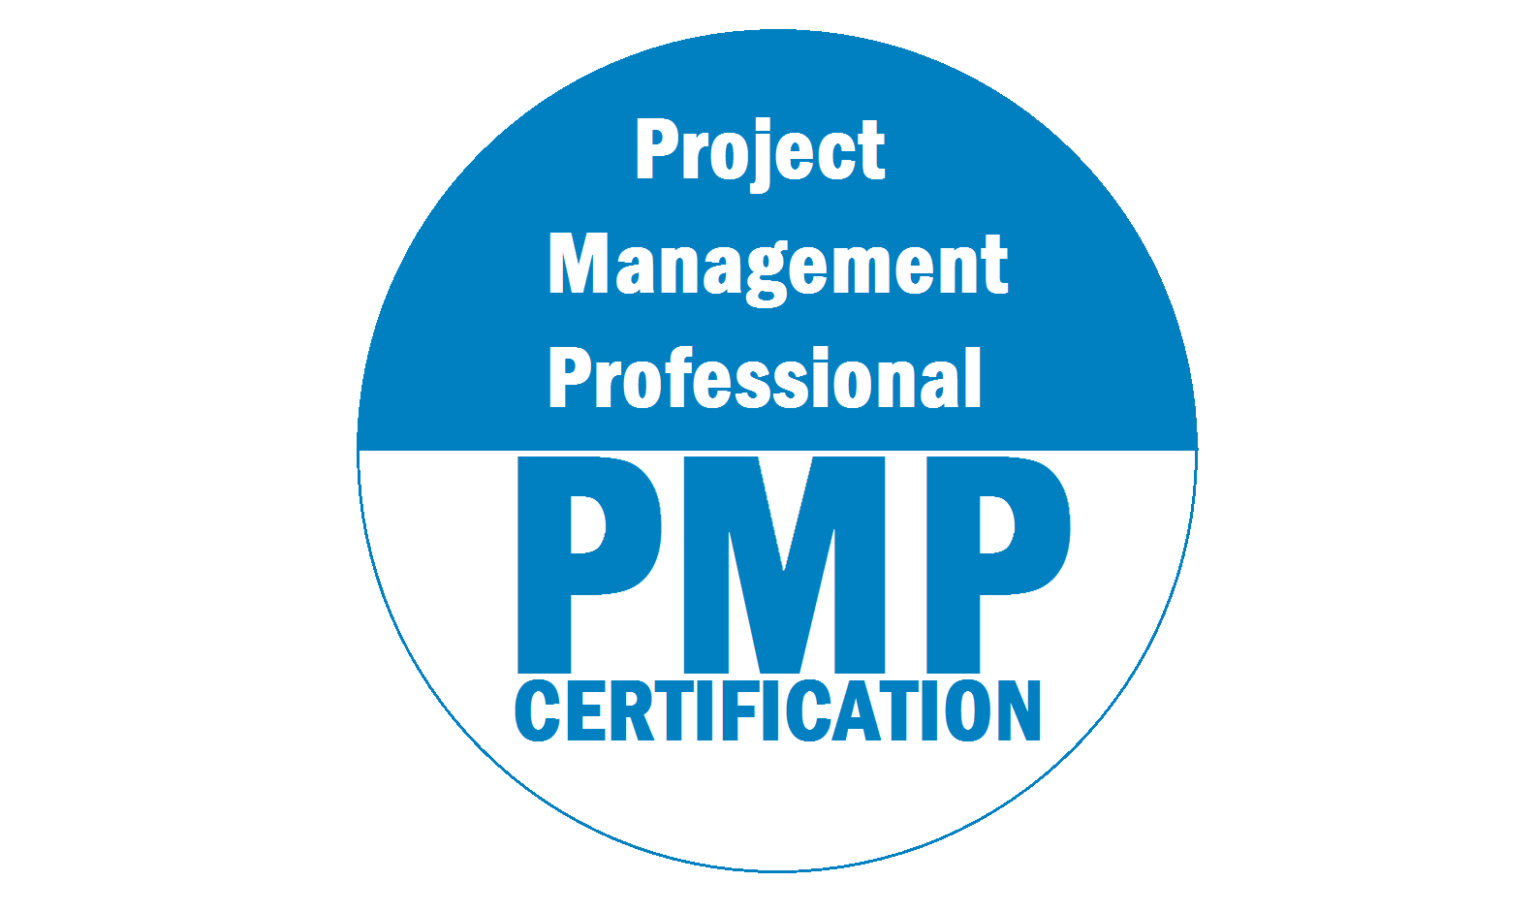 Best Way to Prepare for the PMP Certification